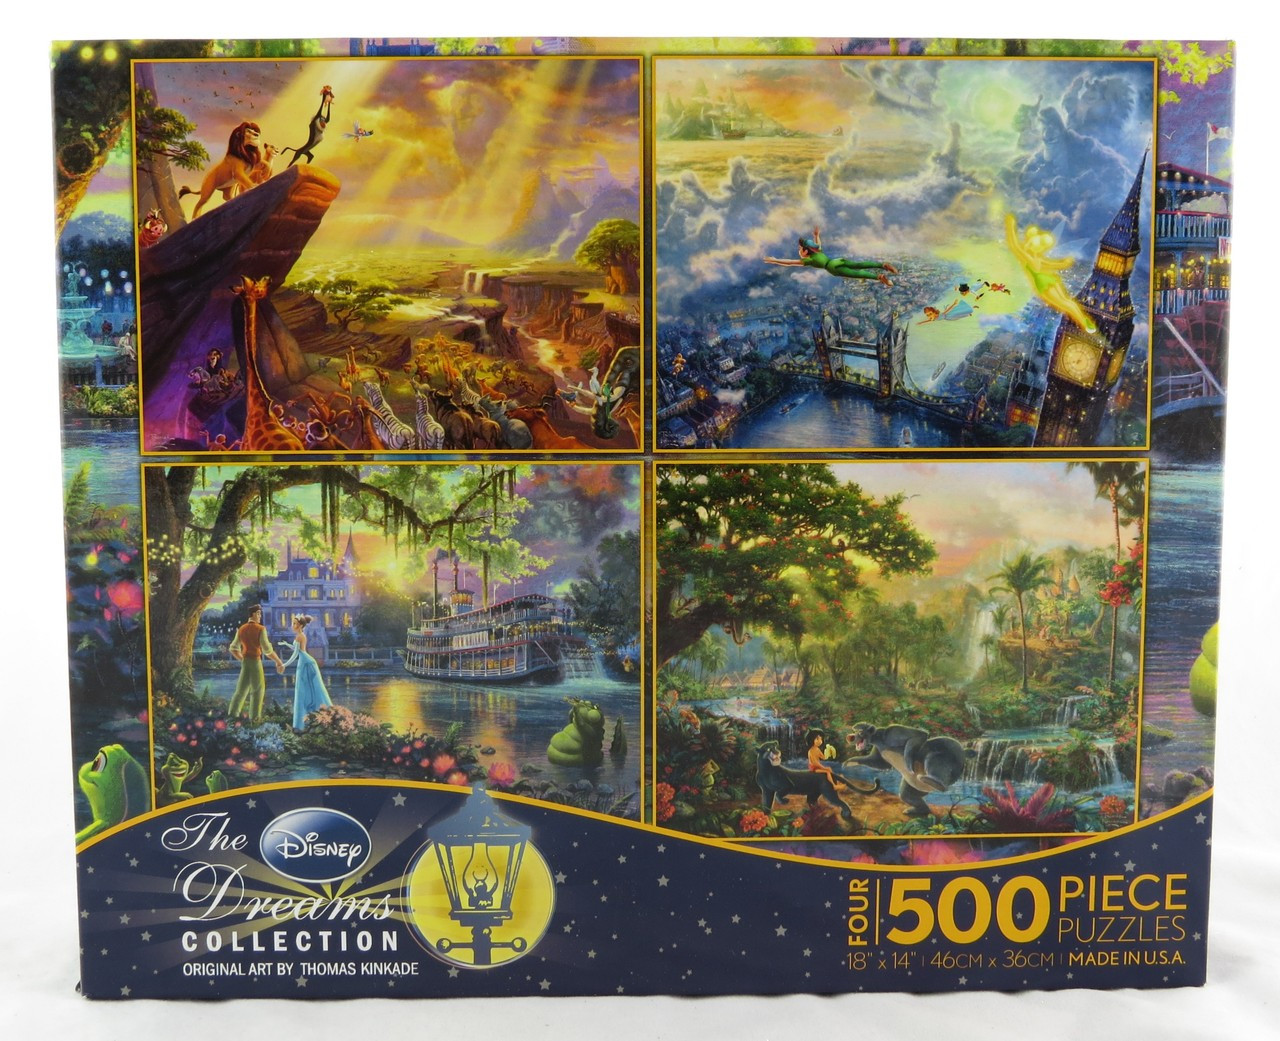 Disney Dreams 500 Piece Jigsaw Puzzle 4In1 Collection